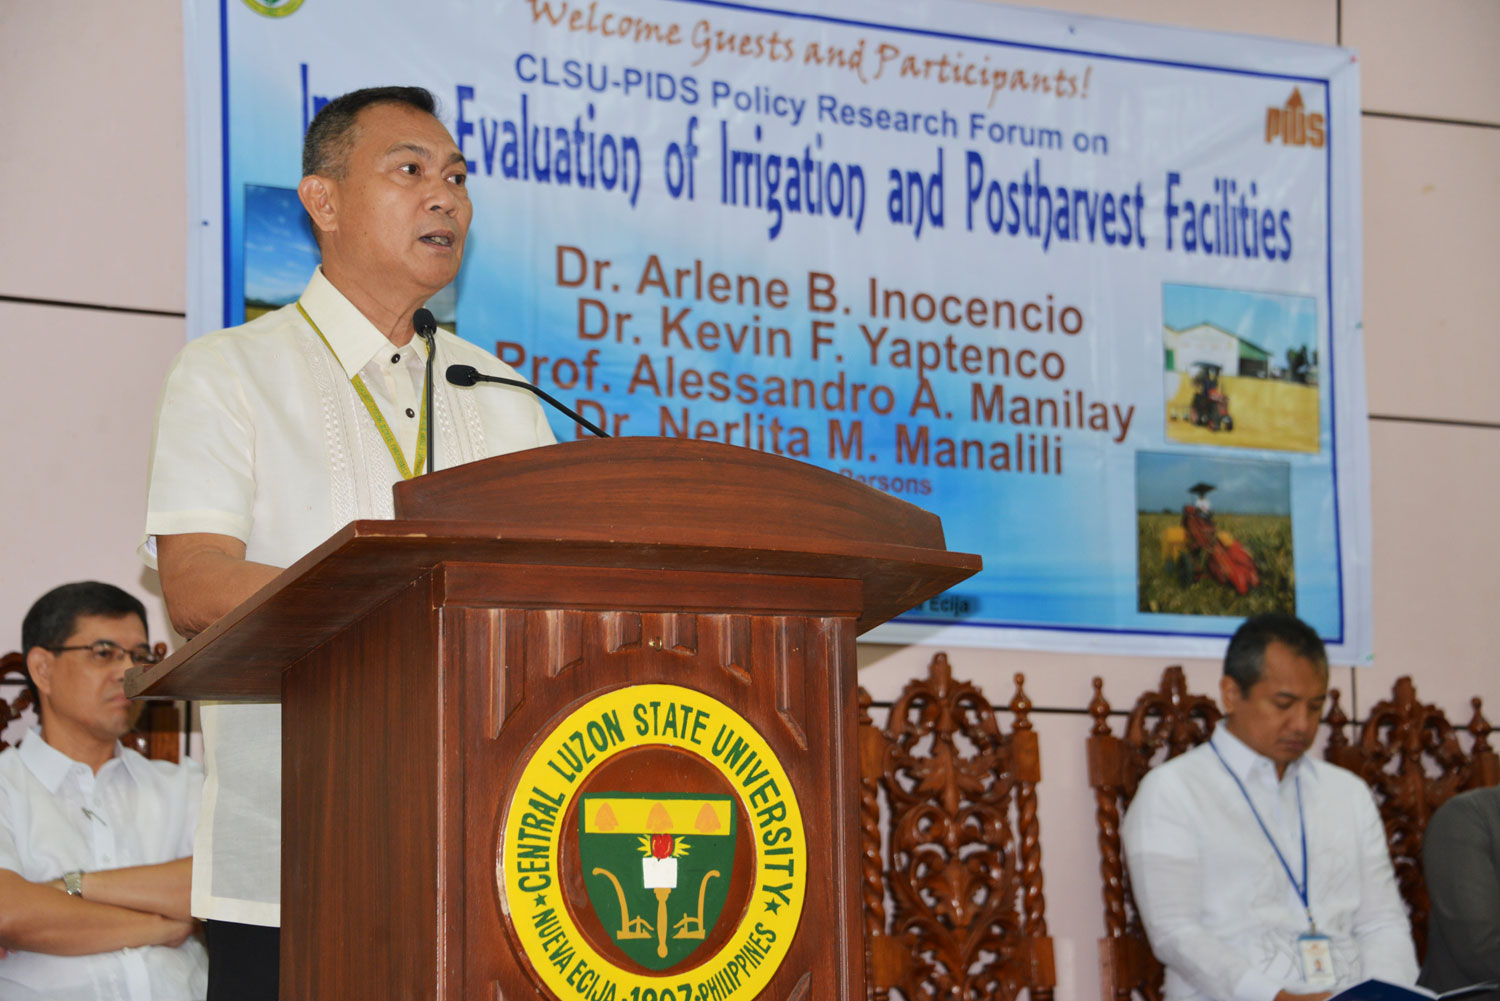 PIDS-CLSU Forum On Impact Evaluation Of Irrigation And Postharvest Facilities-DSC_5752.jpg